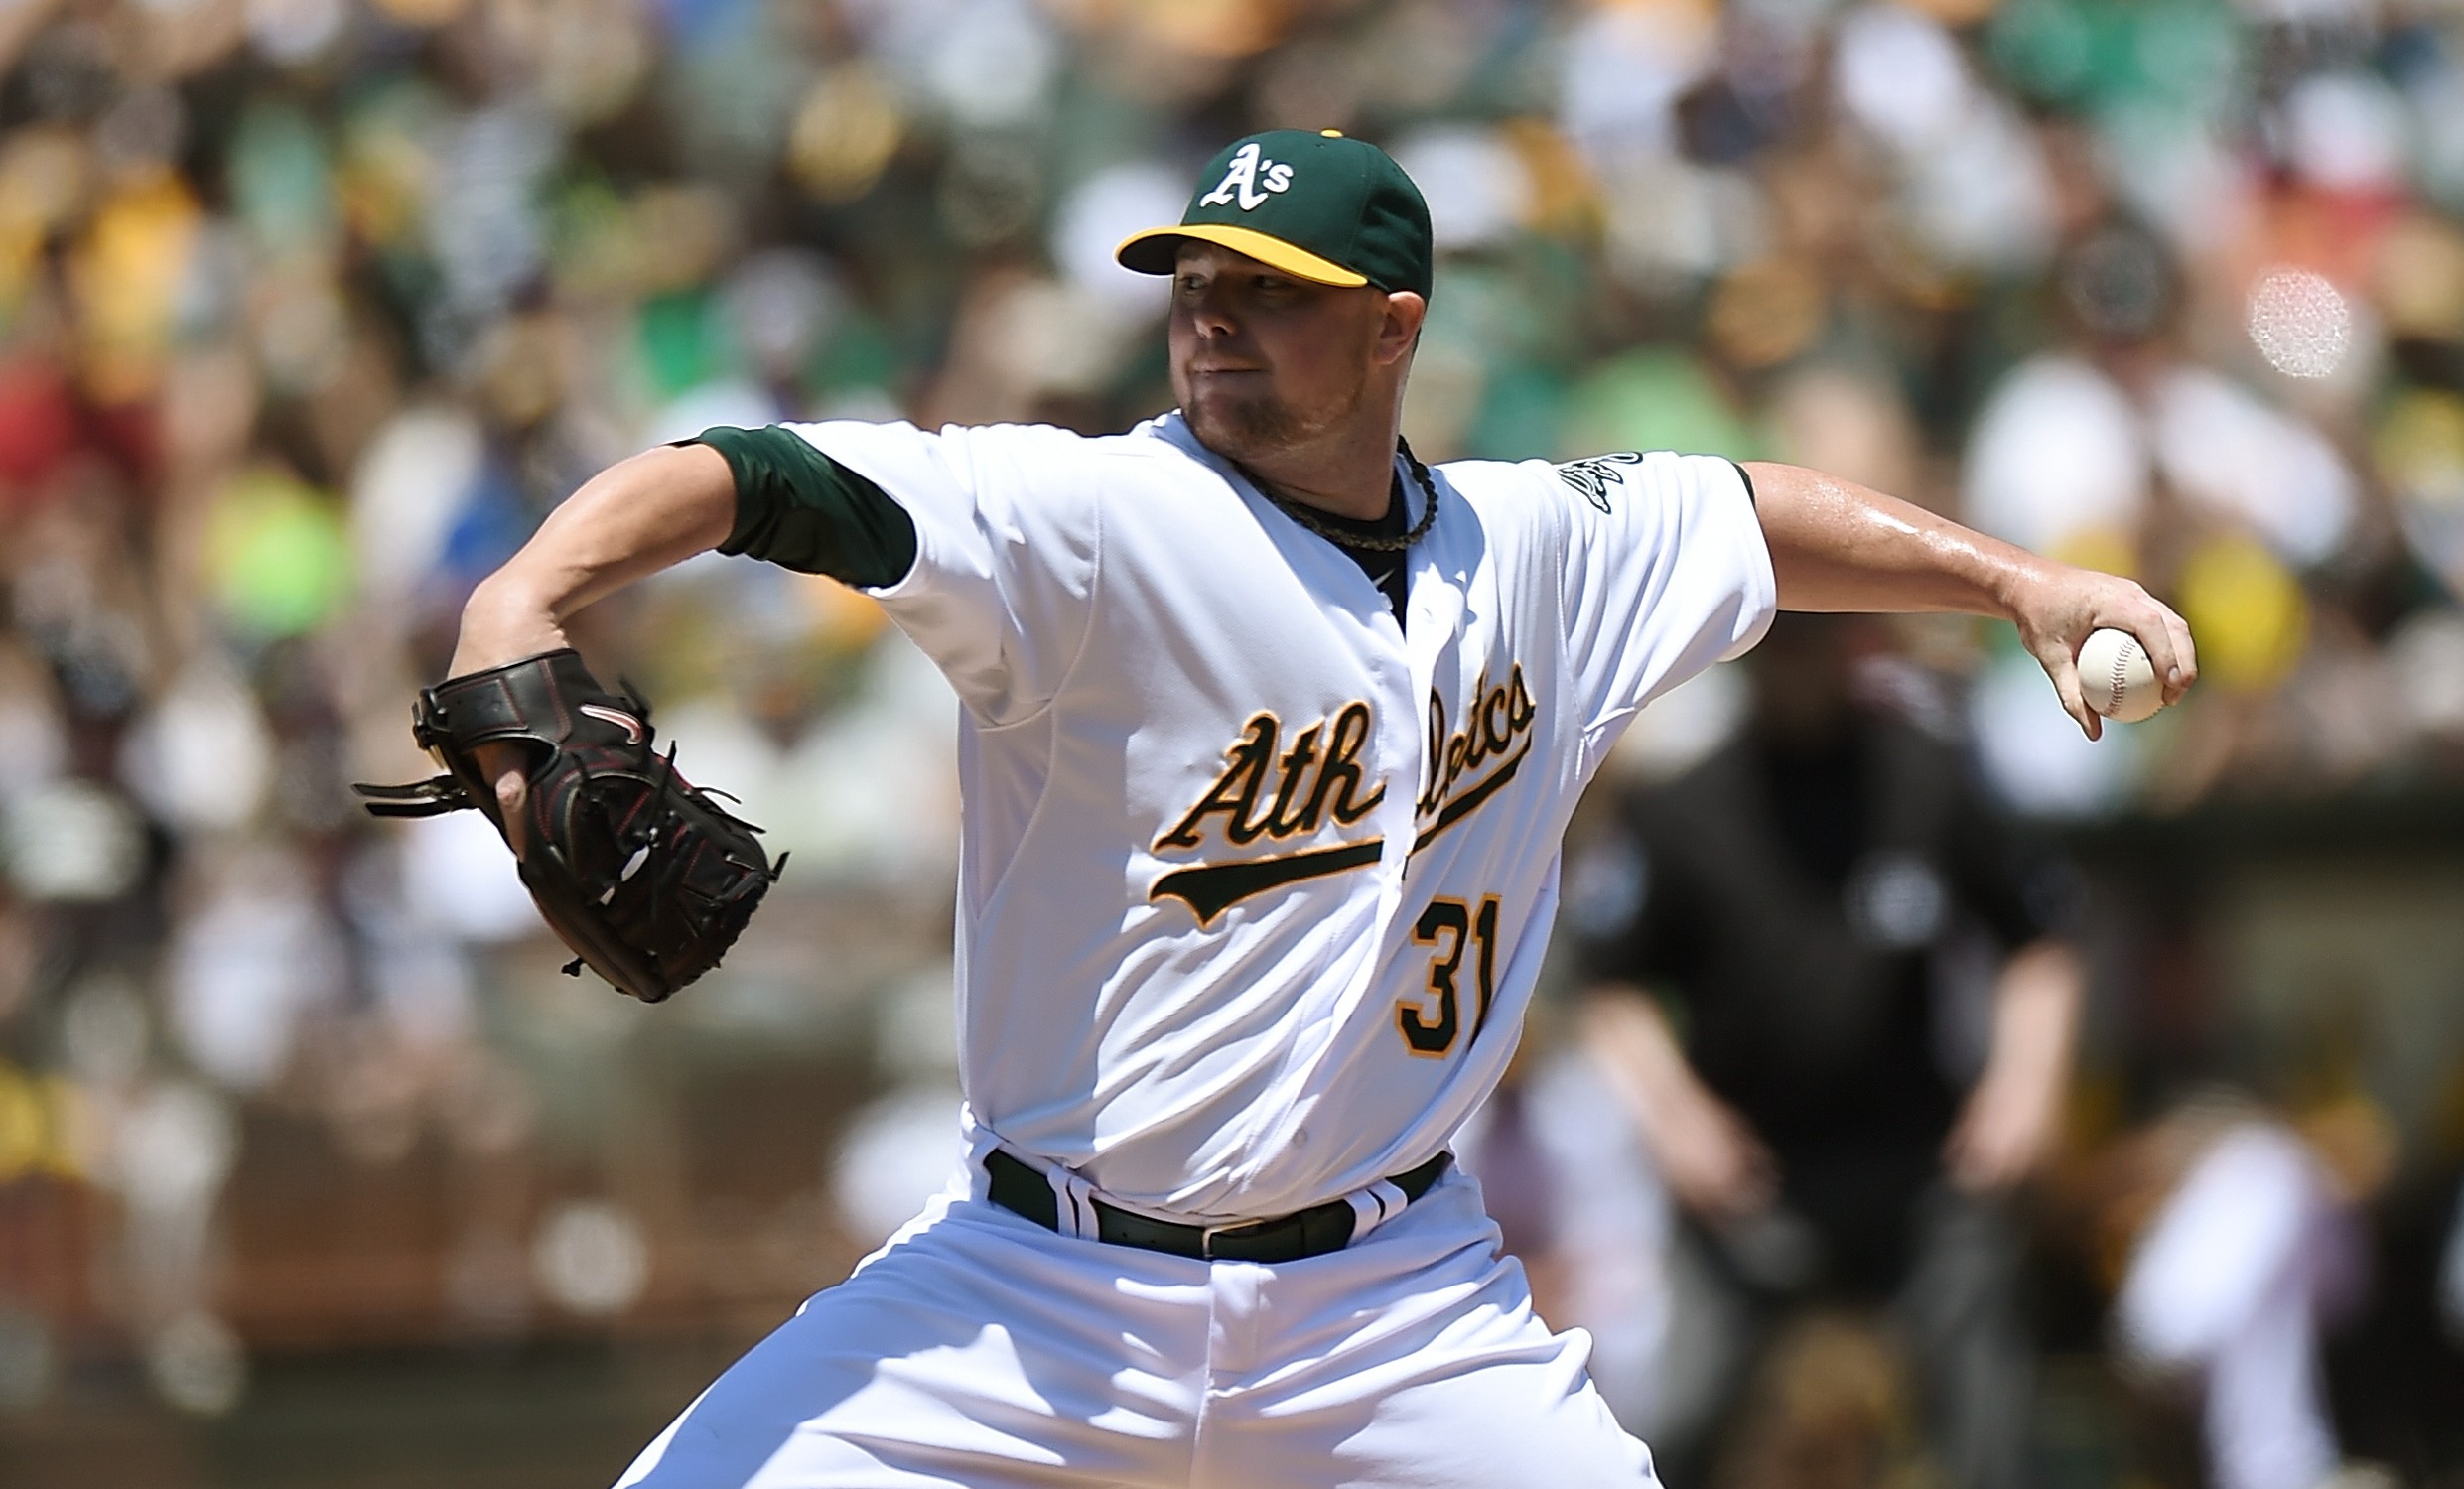 OAKLAND, CA - AUGUST 02:  Jon Lester #31 of the Oakland Athletics pitches against the Kansas City Royals in the top of the second inning at O.co Coliseum on August 2, 2014 in Oakland, California.  (Photo by Thearon W. Henderson/Getty Images)